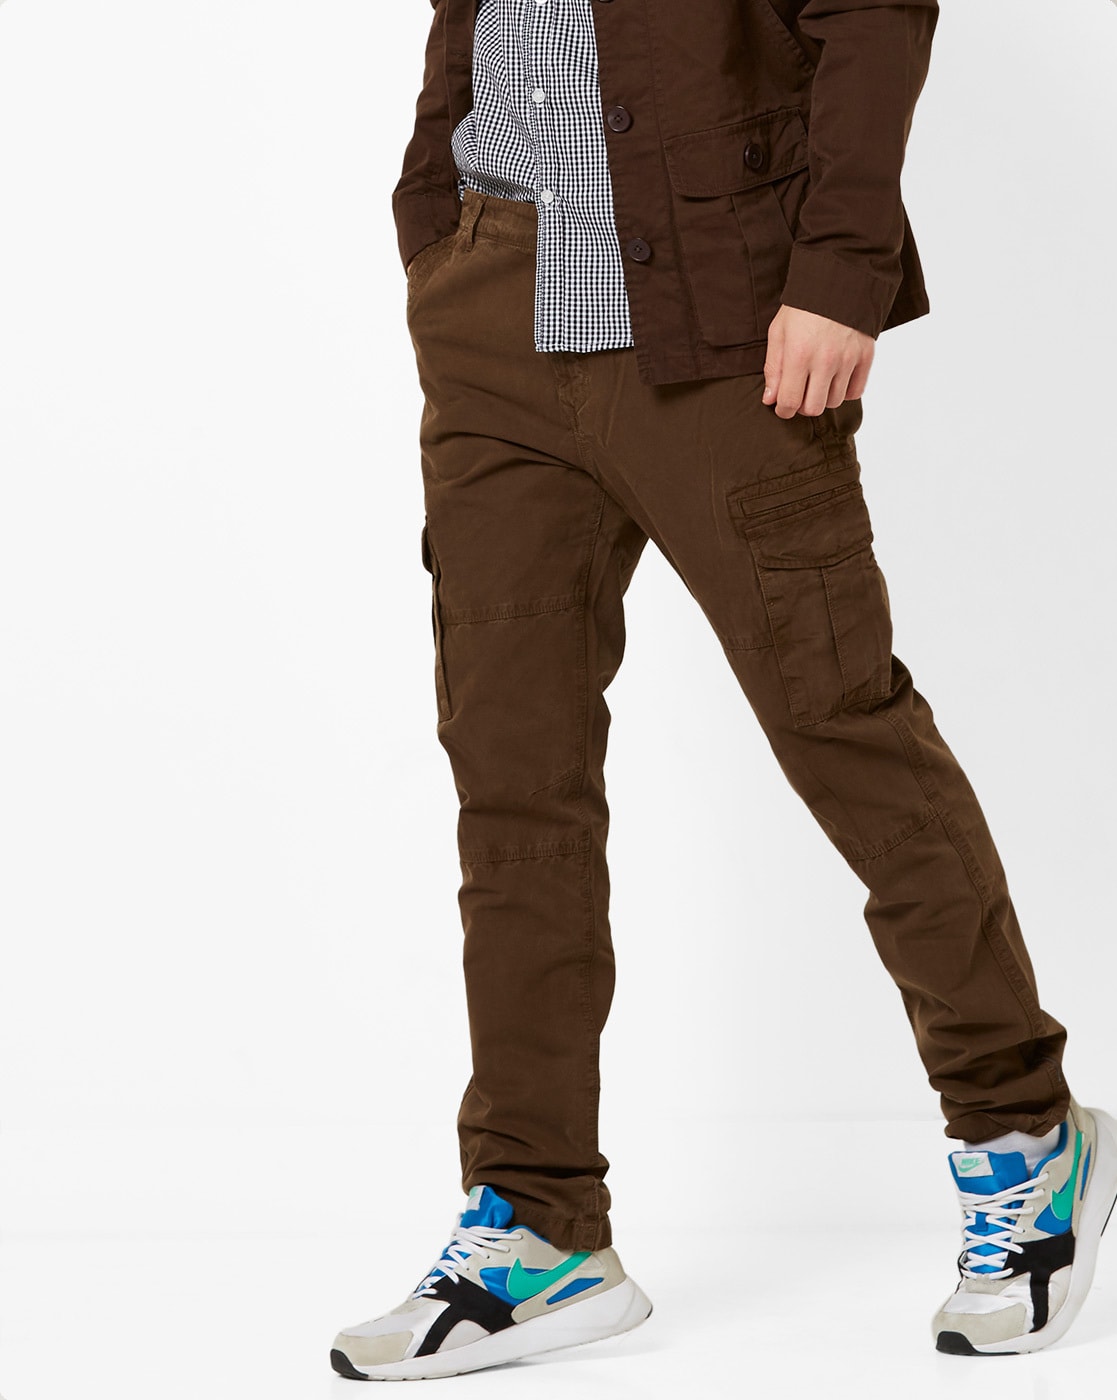 Buy olive Trousers  Pants for Men by US Polo Assn Online  Ajiocom